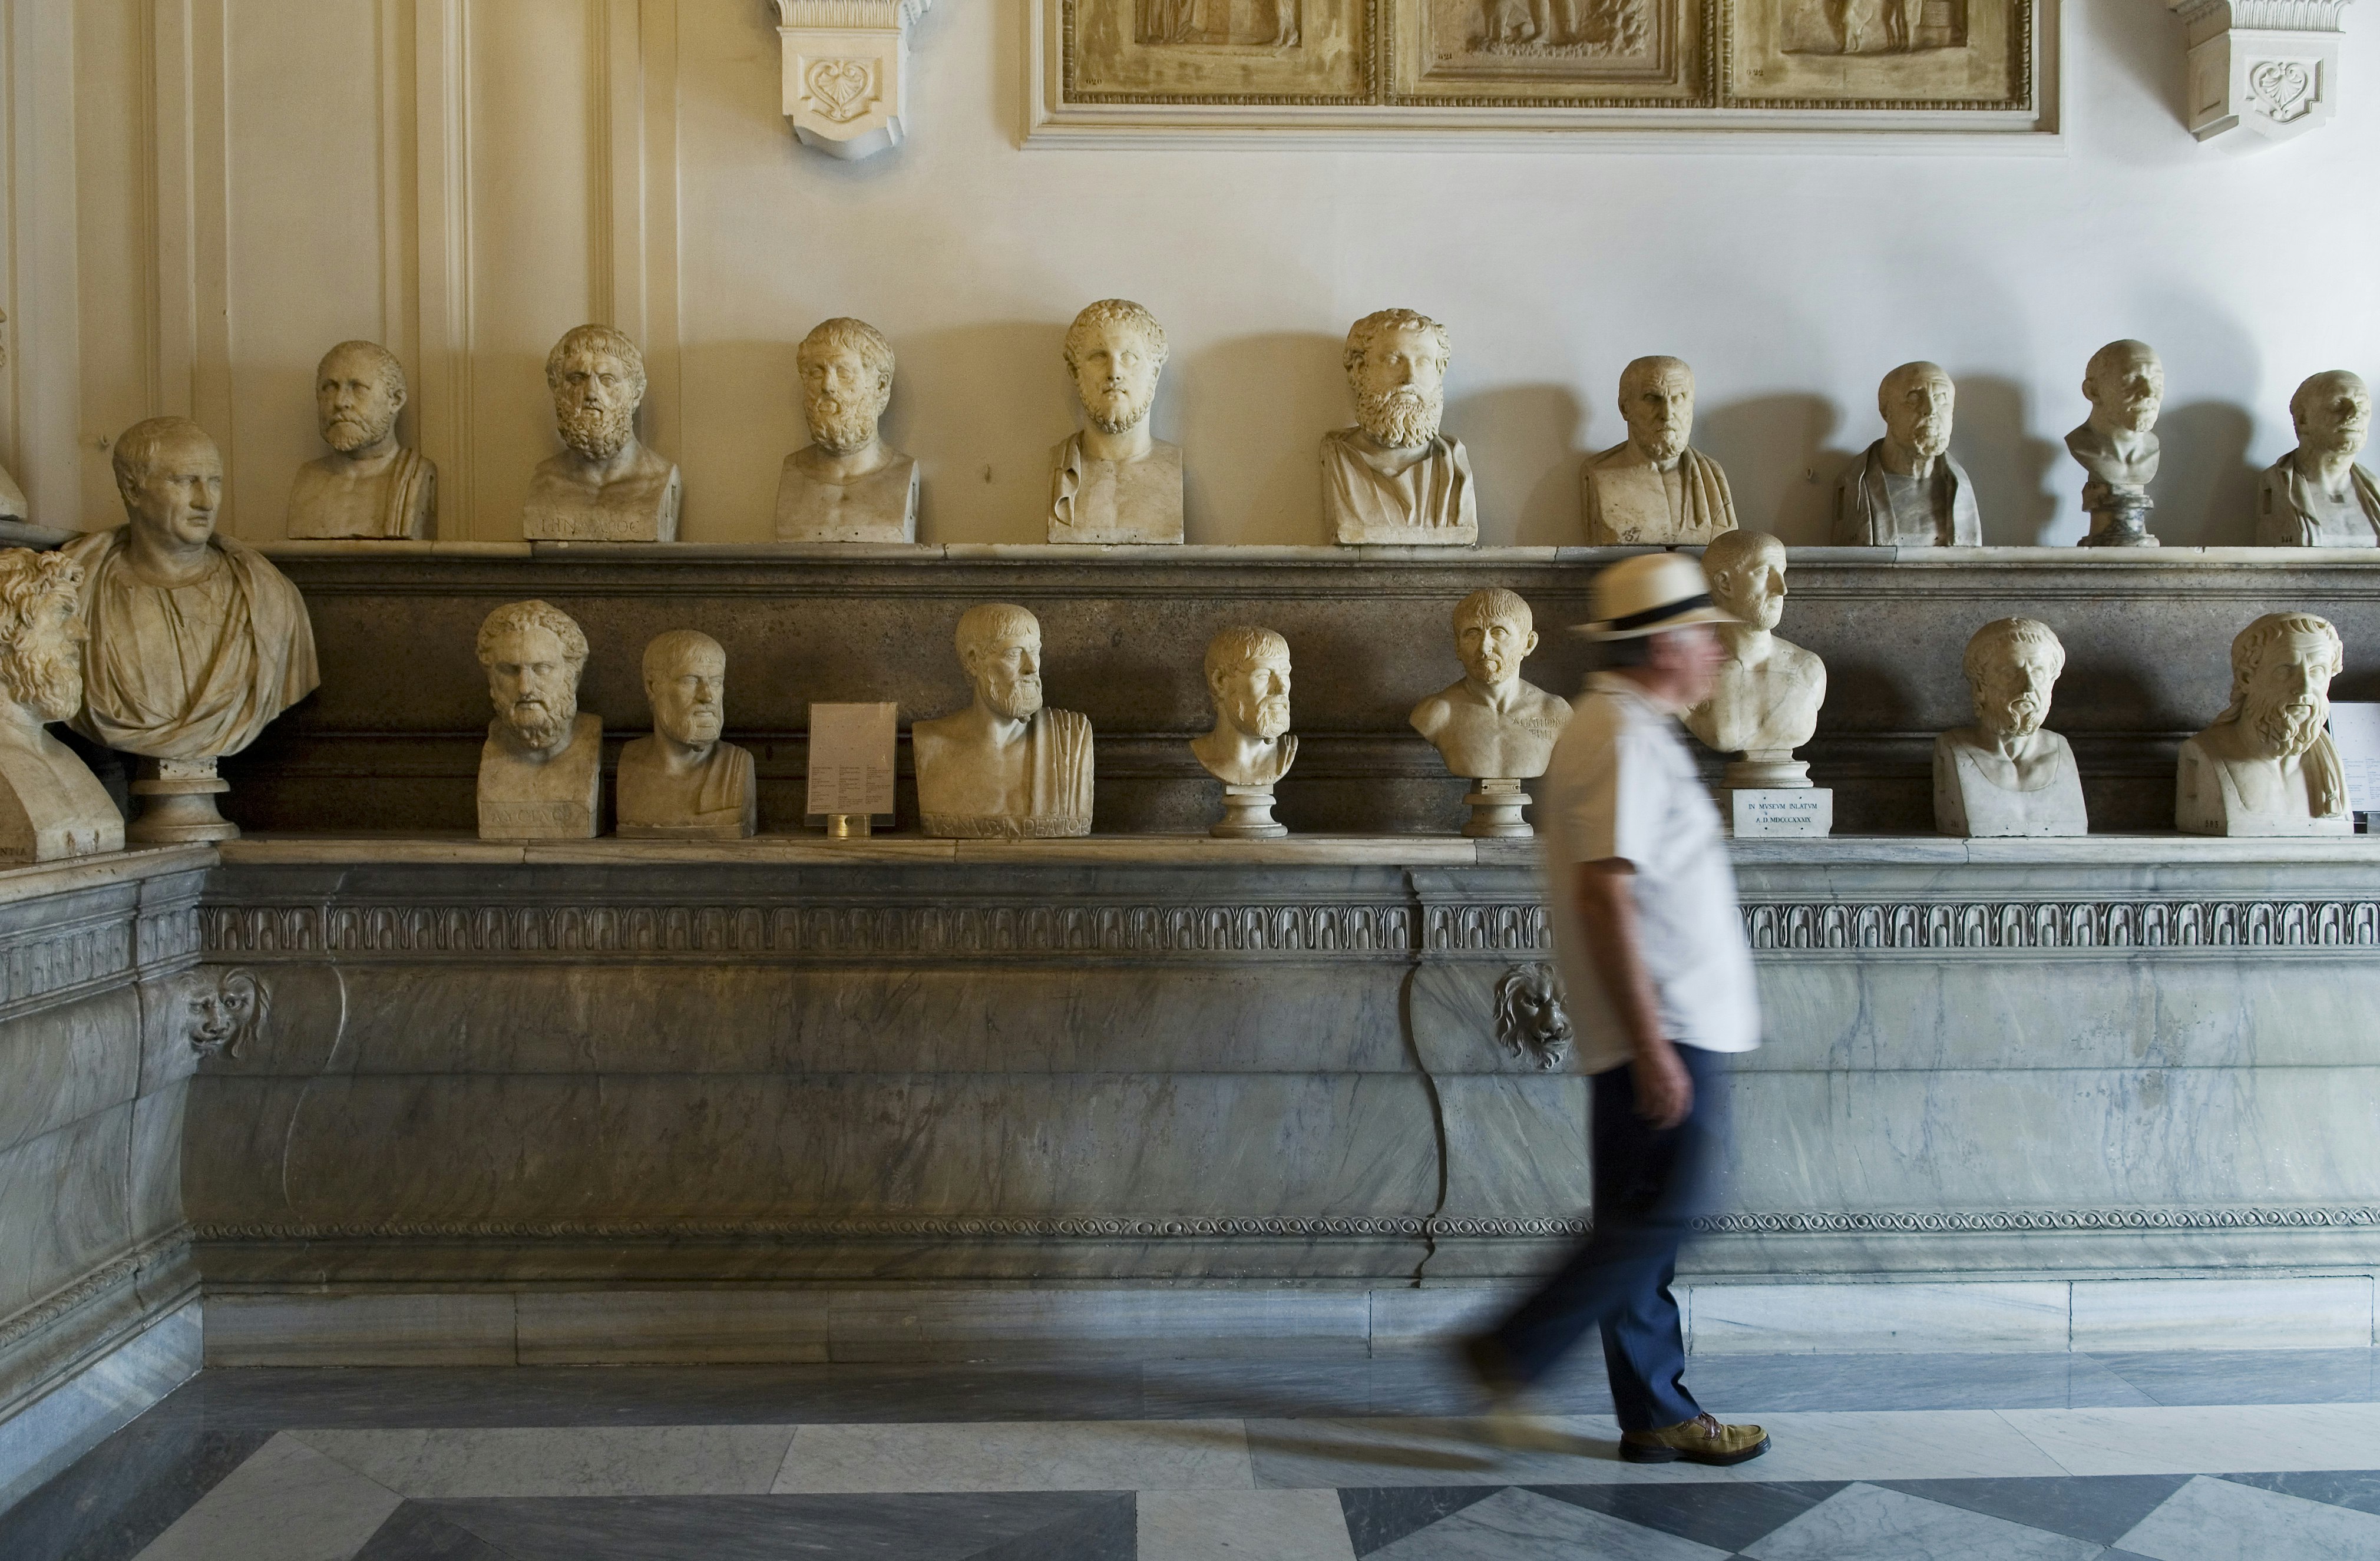 An array of marble busts of various philosophers are sitting on shelves in a museum. A man is walking past.